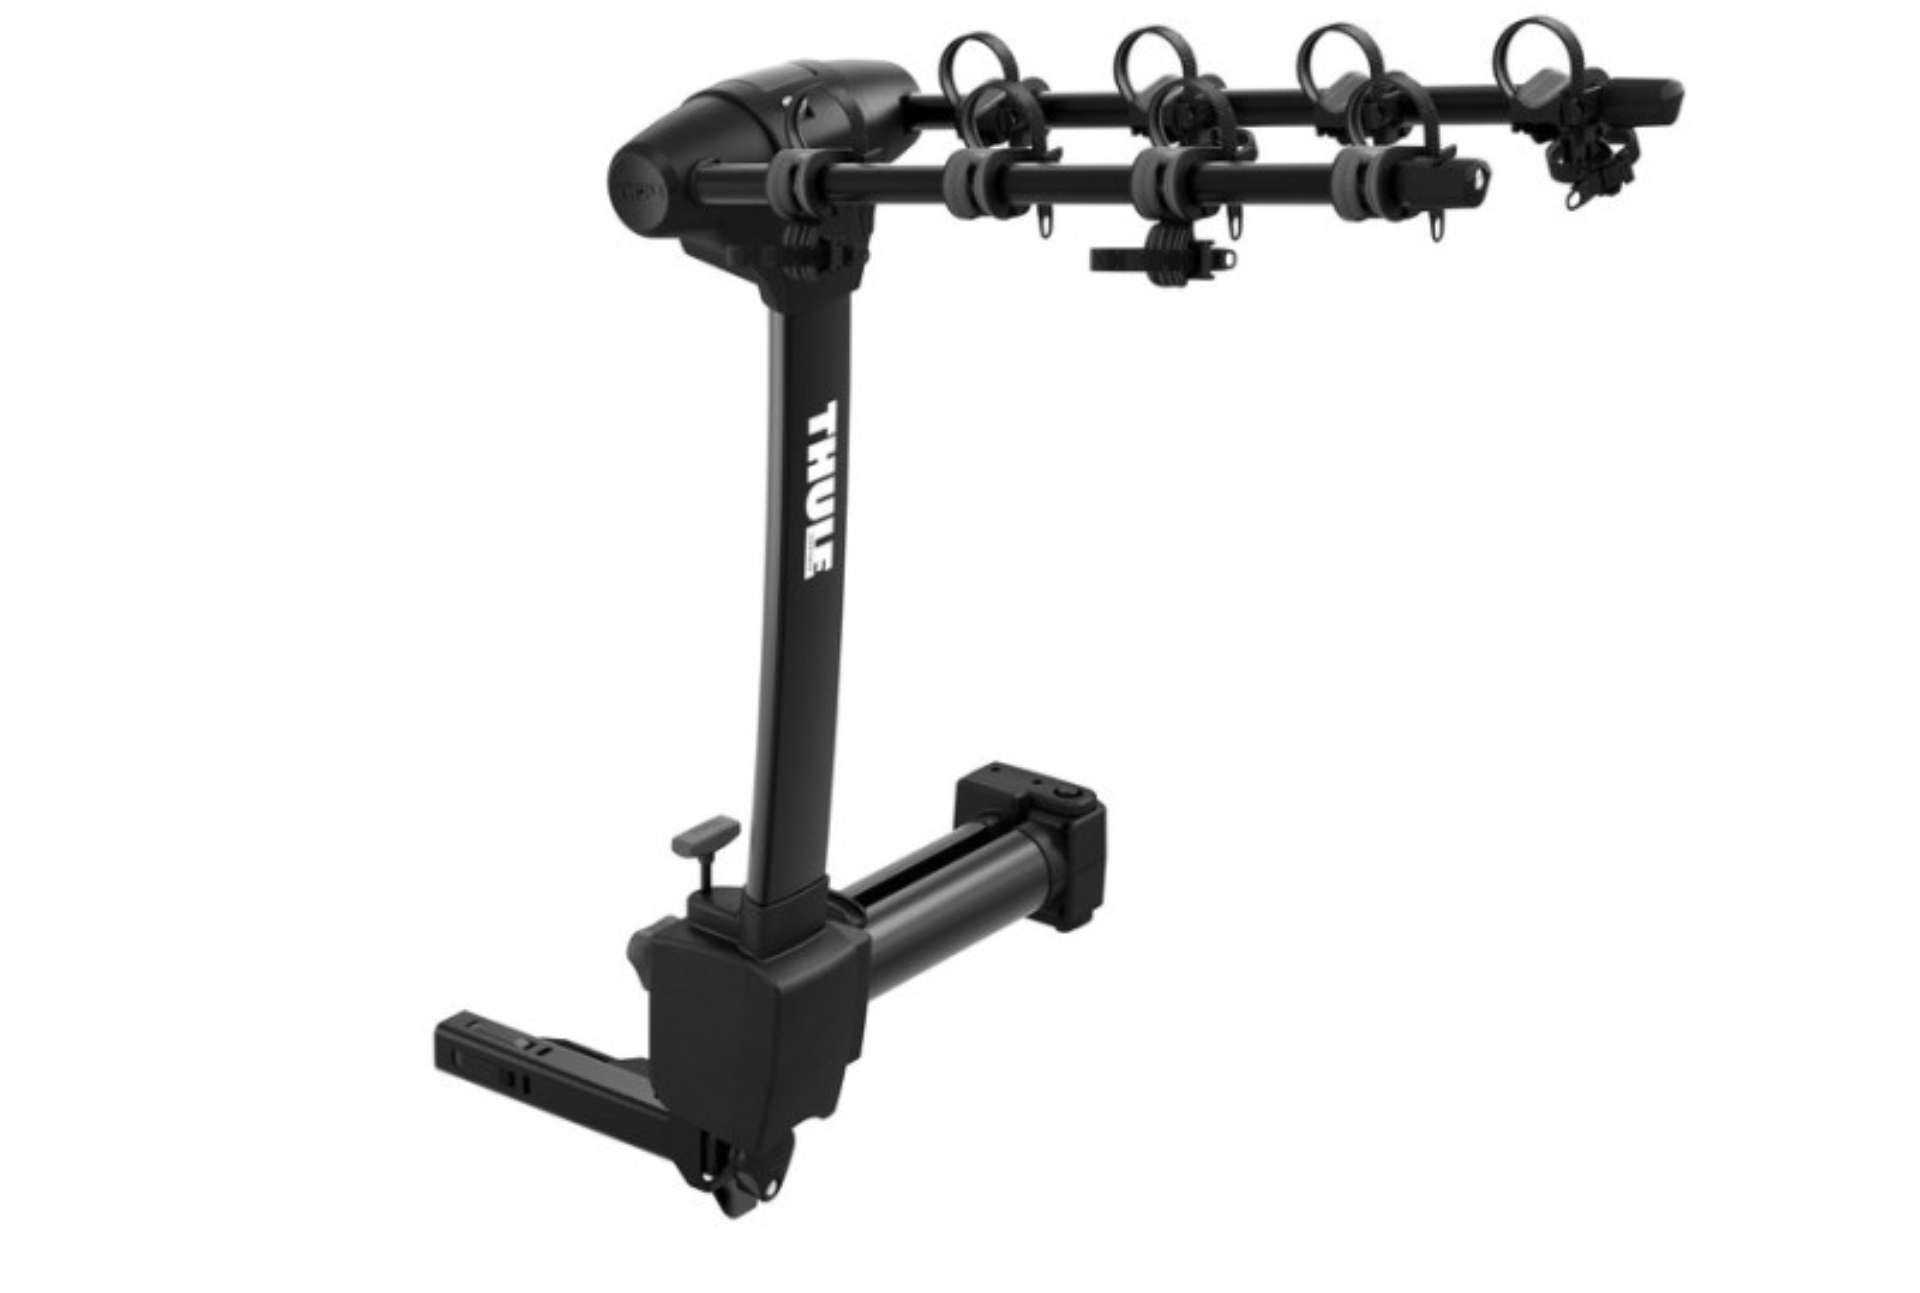 Picture of Thule Apex XT Swing 4 - Hanging Hitch Bike Rack w-Swing-Away Arm Up to 4 Bikes - Black